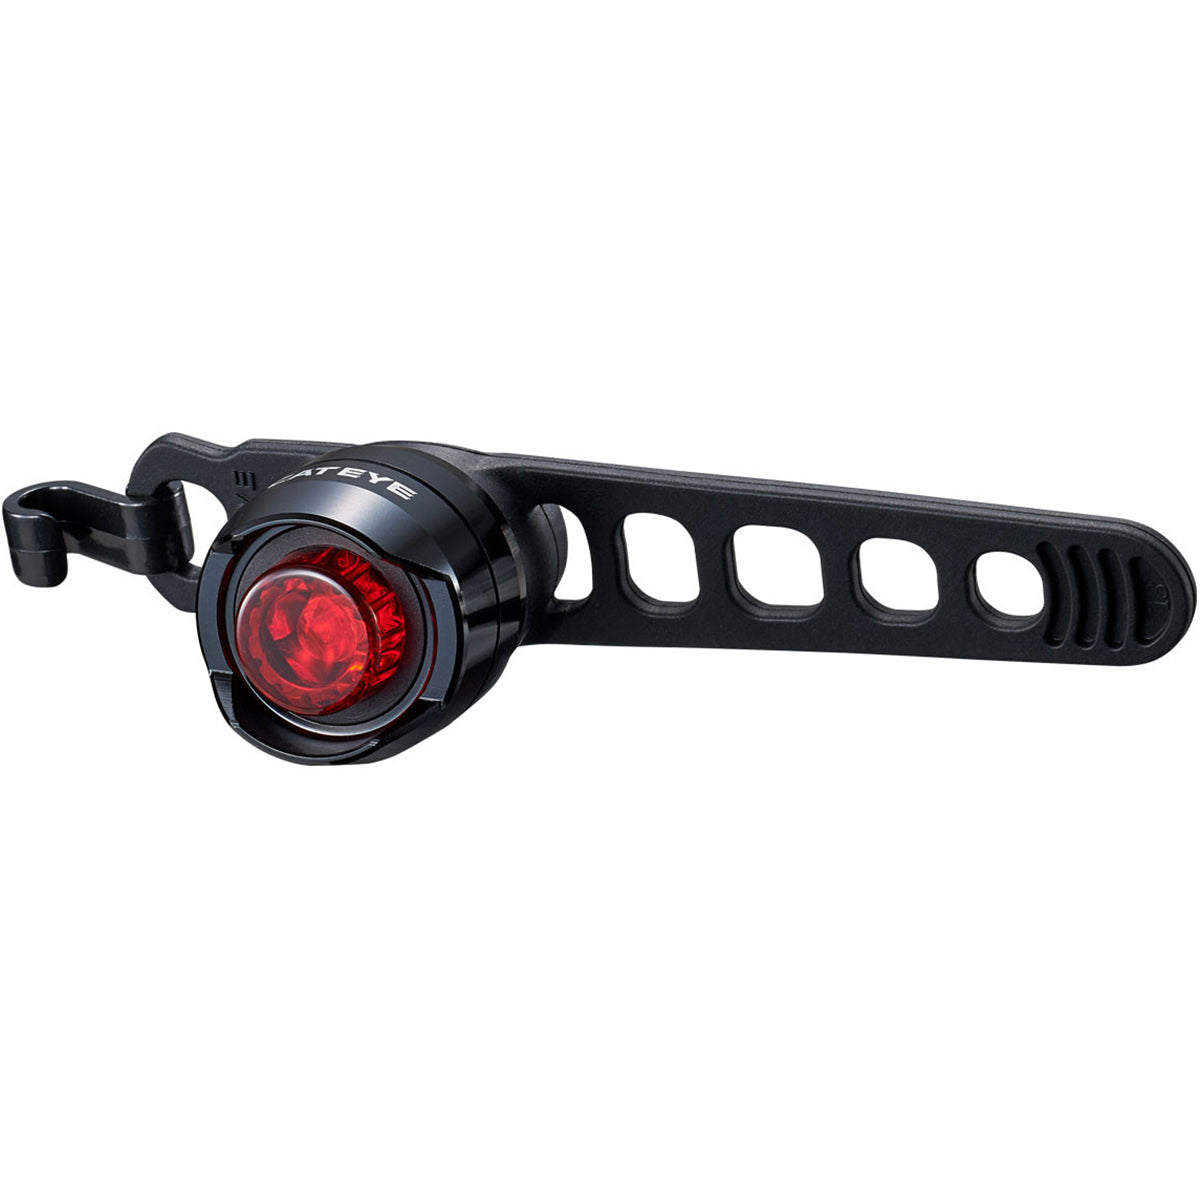 CatEye Orb Rechargeable Rear Bicycle Light - SL-LD160RC-R CatEye